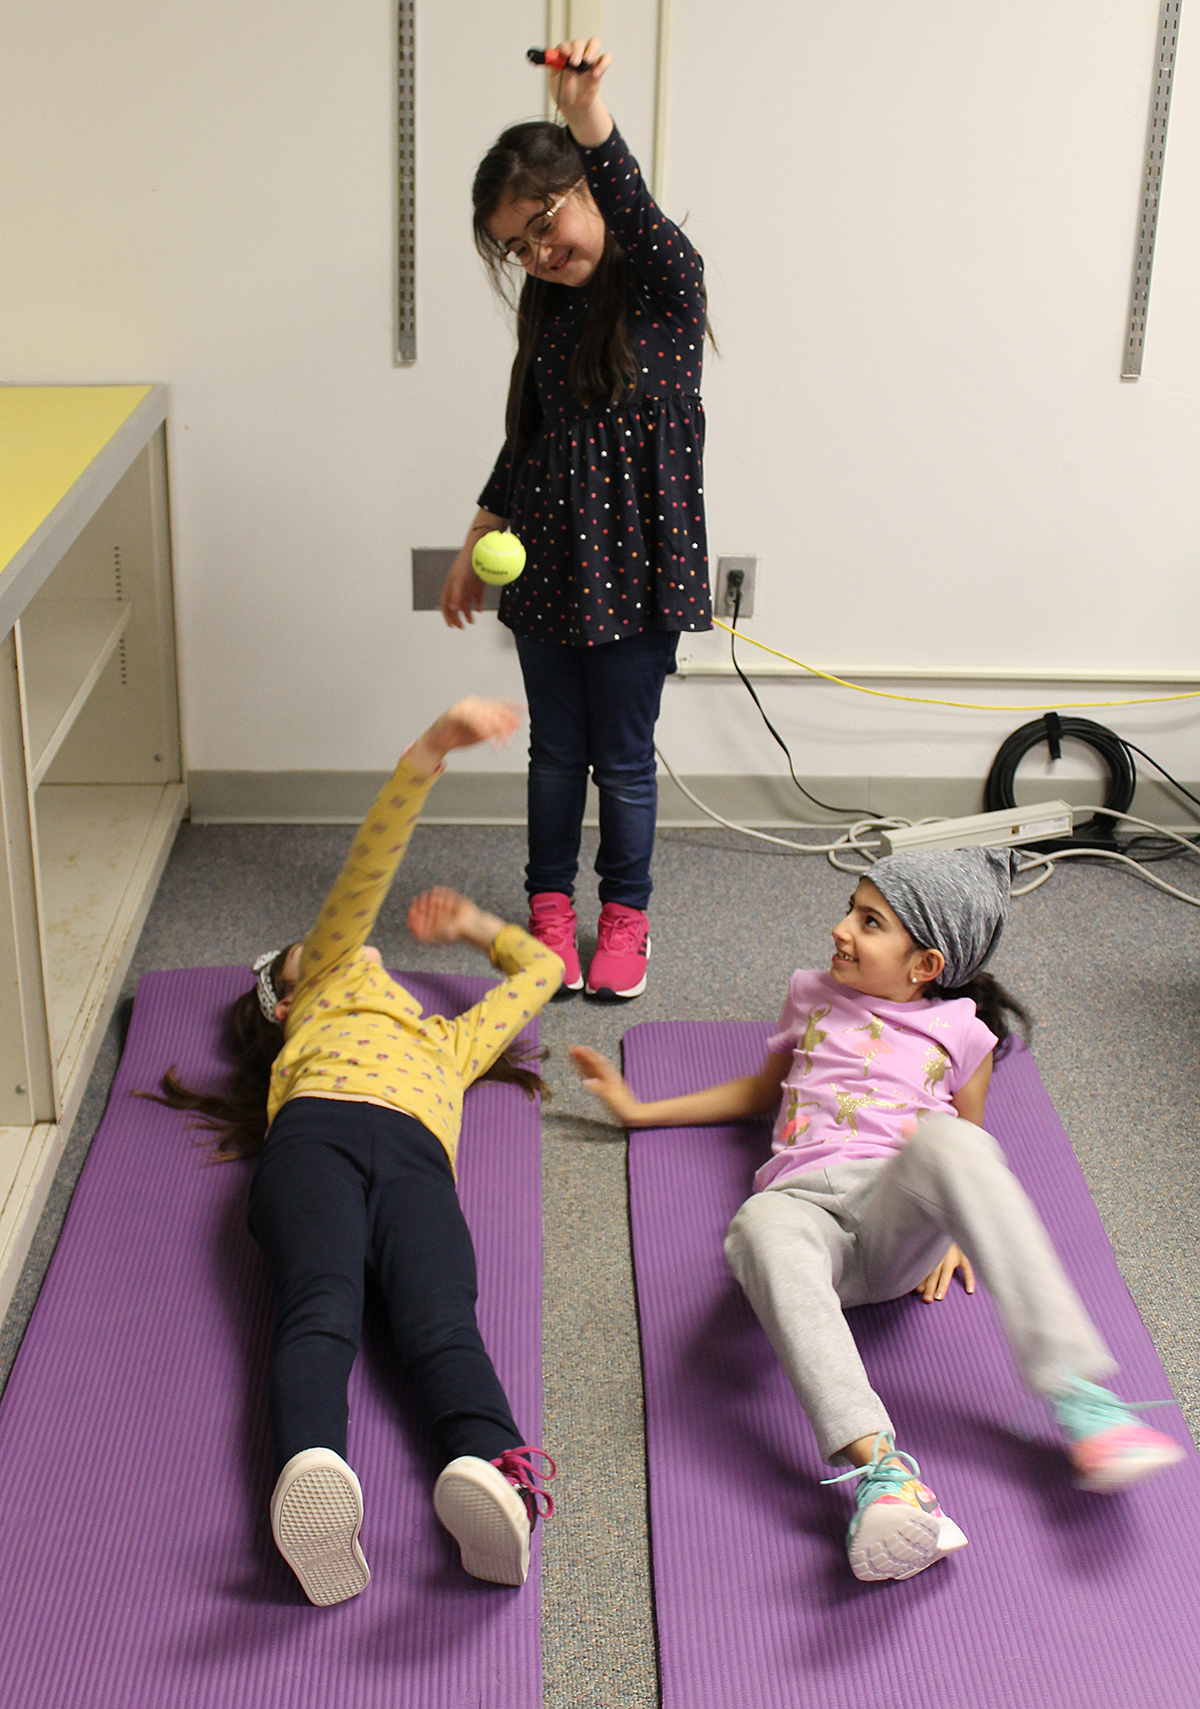 Two students laying on floor and a third student standing over them dangling a tennis ball from a string.